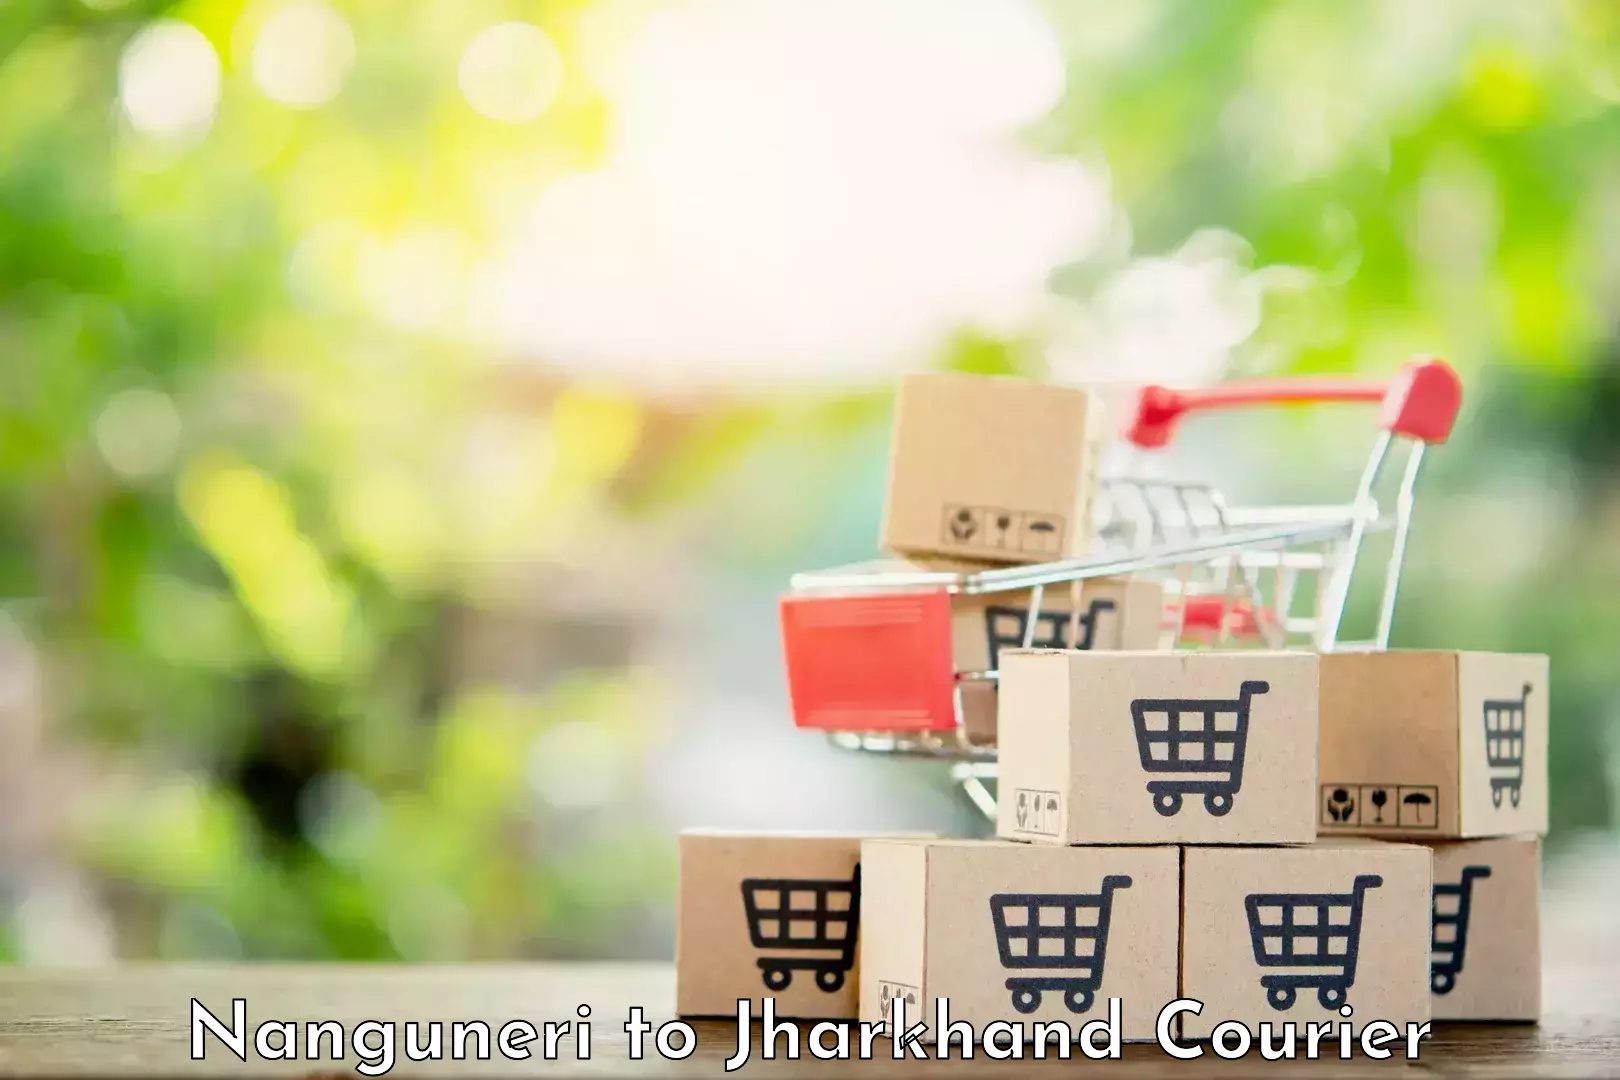 Residential courier service Nanguneri to Chatra